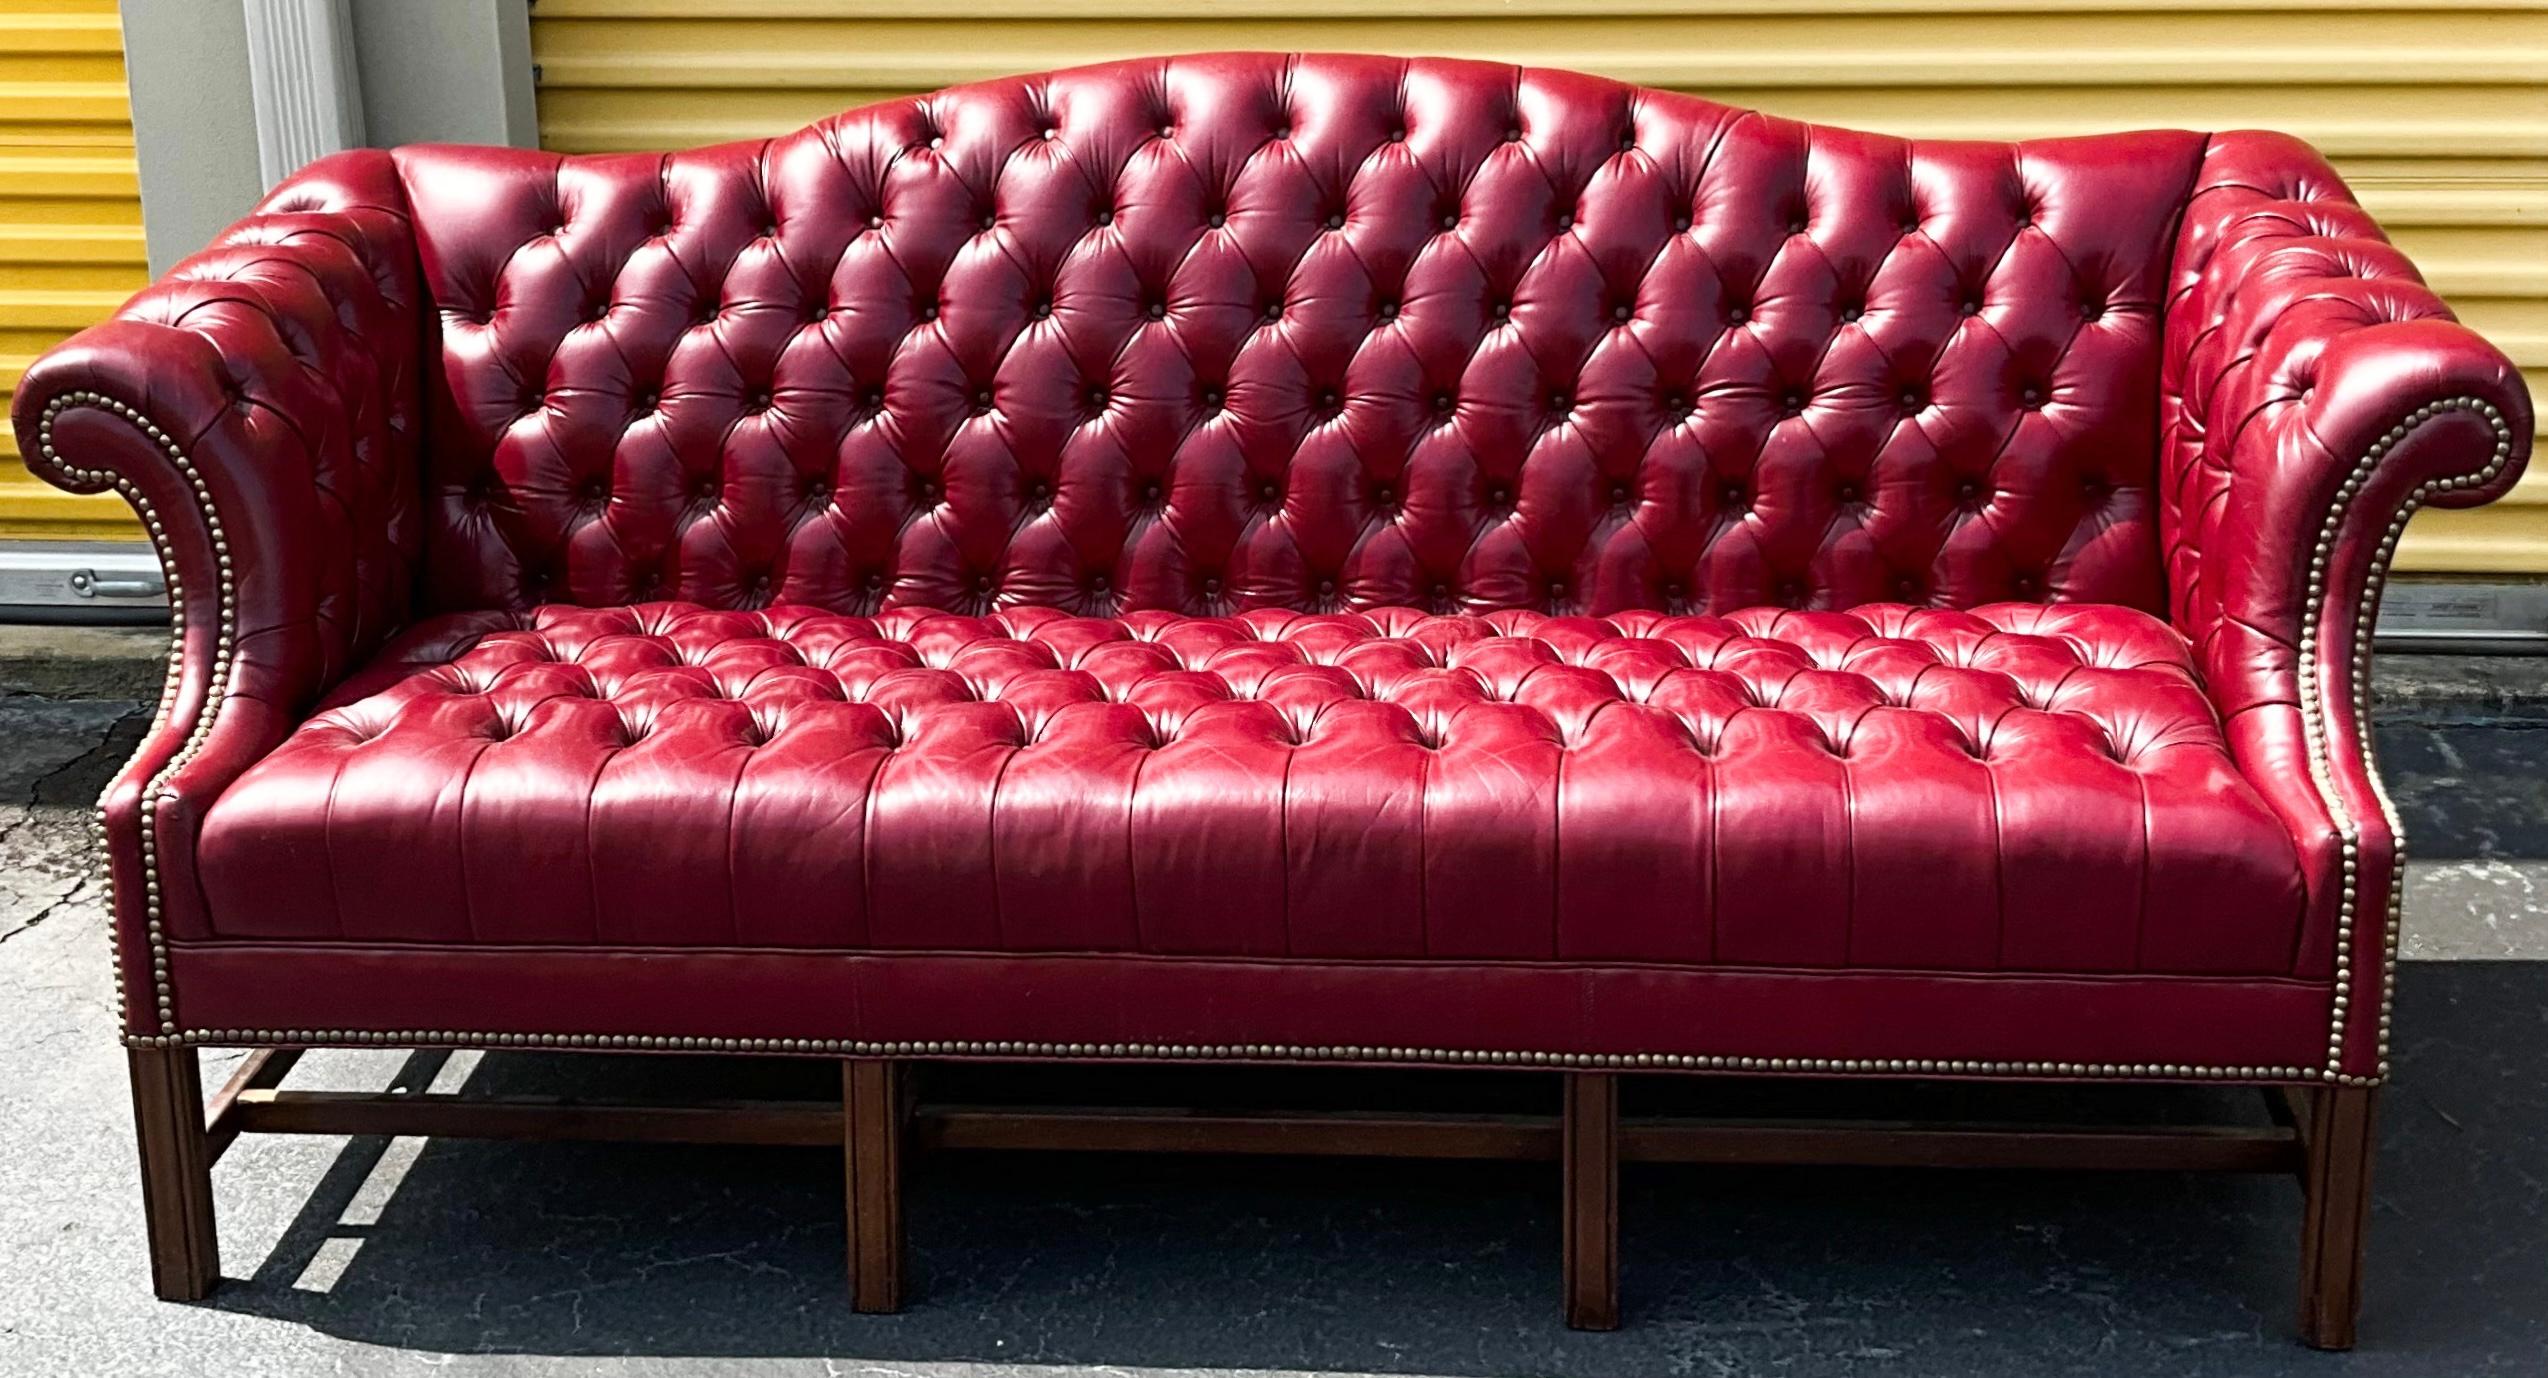 20th Century English Style Red Leather Chesterfield Style Camelback Sofa W/ Brass Nailheads 